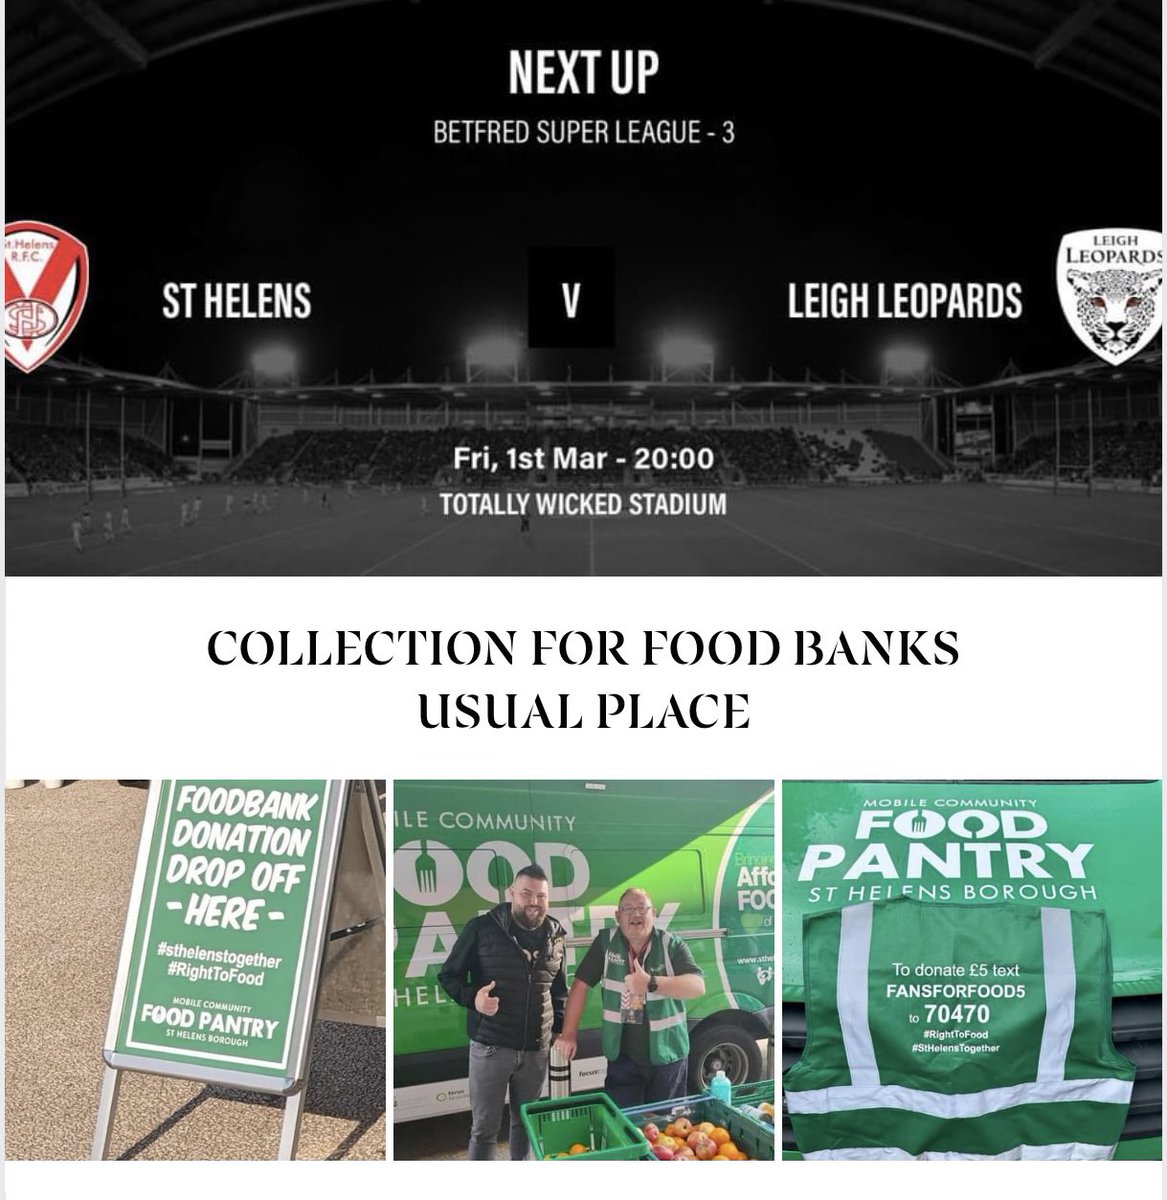 Collection for @HopeStHelens foodbank usual place if you can Donate Like Share @HSHVCA @CommunitySaints @SFoodbanks @CwuWamc @SPFCHARITY @StHelensChamber @RedVeeDotNet @ThattoRugby @ClockFaceMiners @blackbrookfc1 @PorticoVineRLFC @PilksRecsARLFC @NewtonStormARL @GarswoodStagsRL